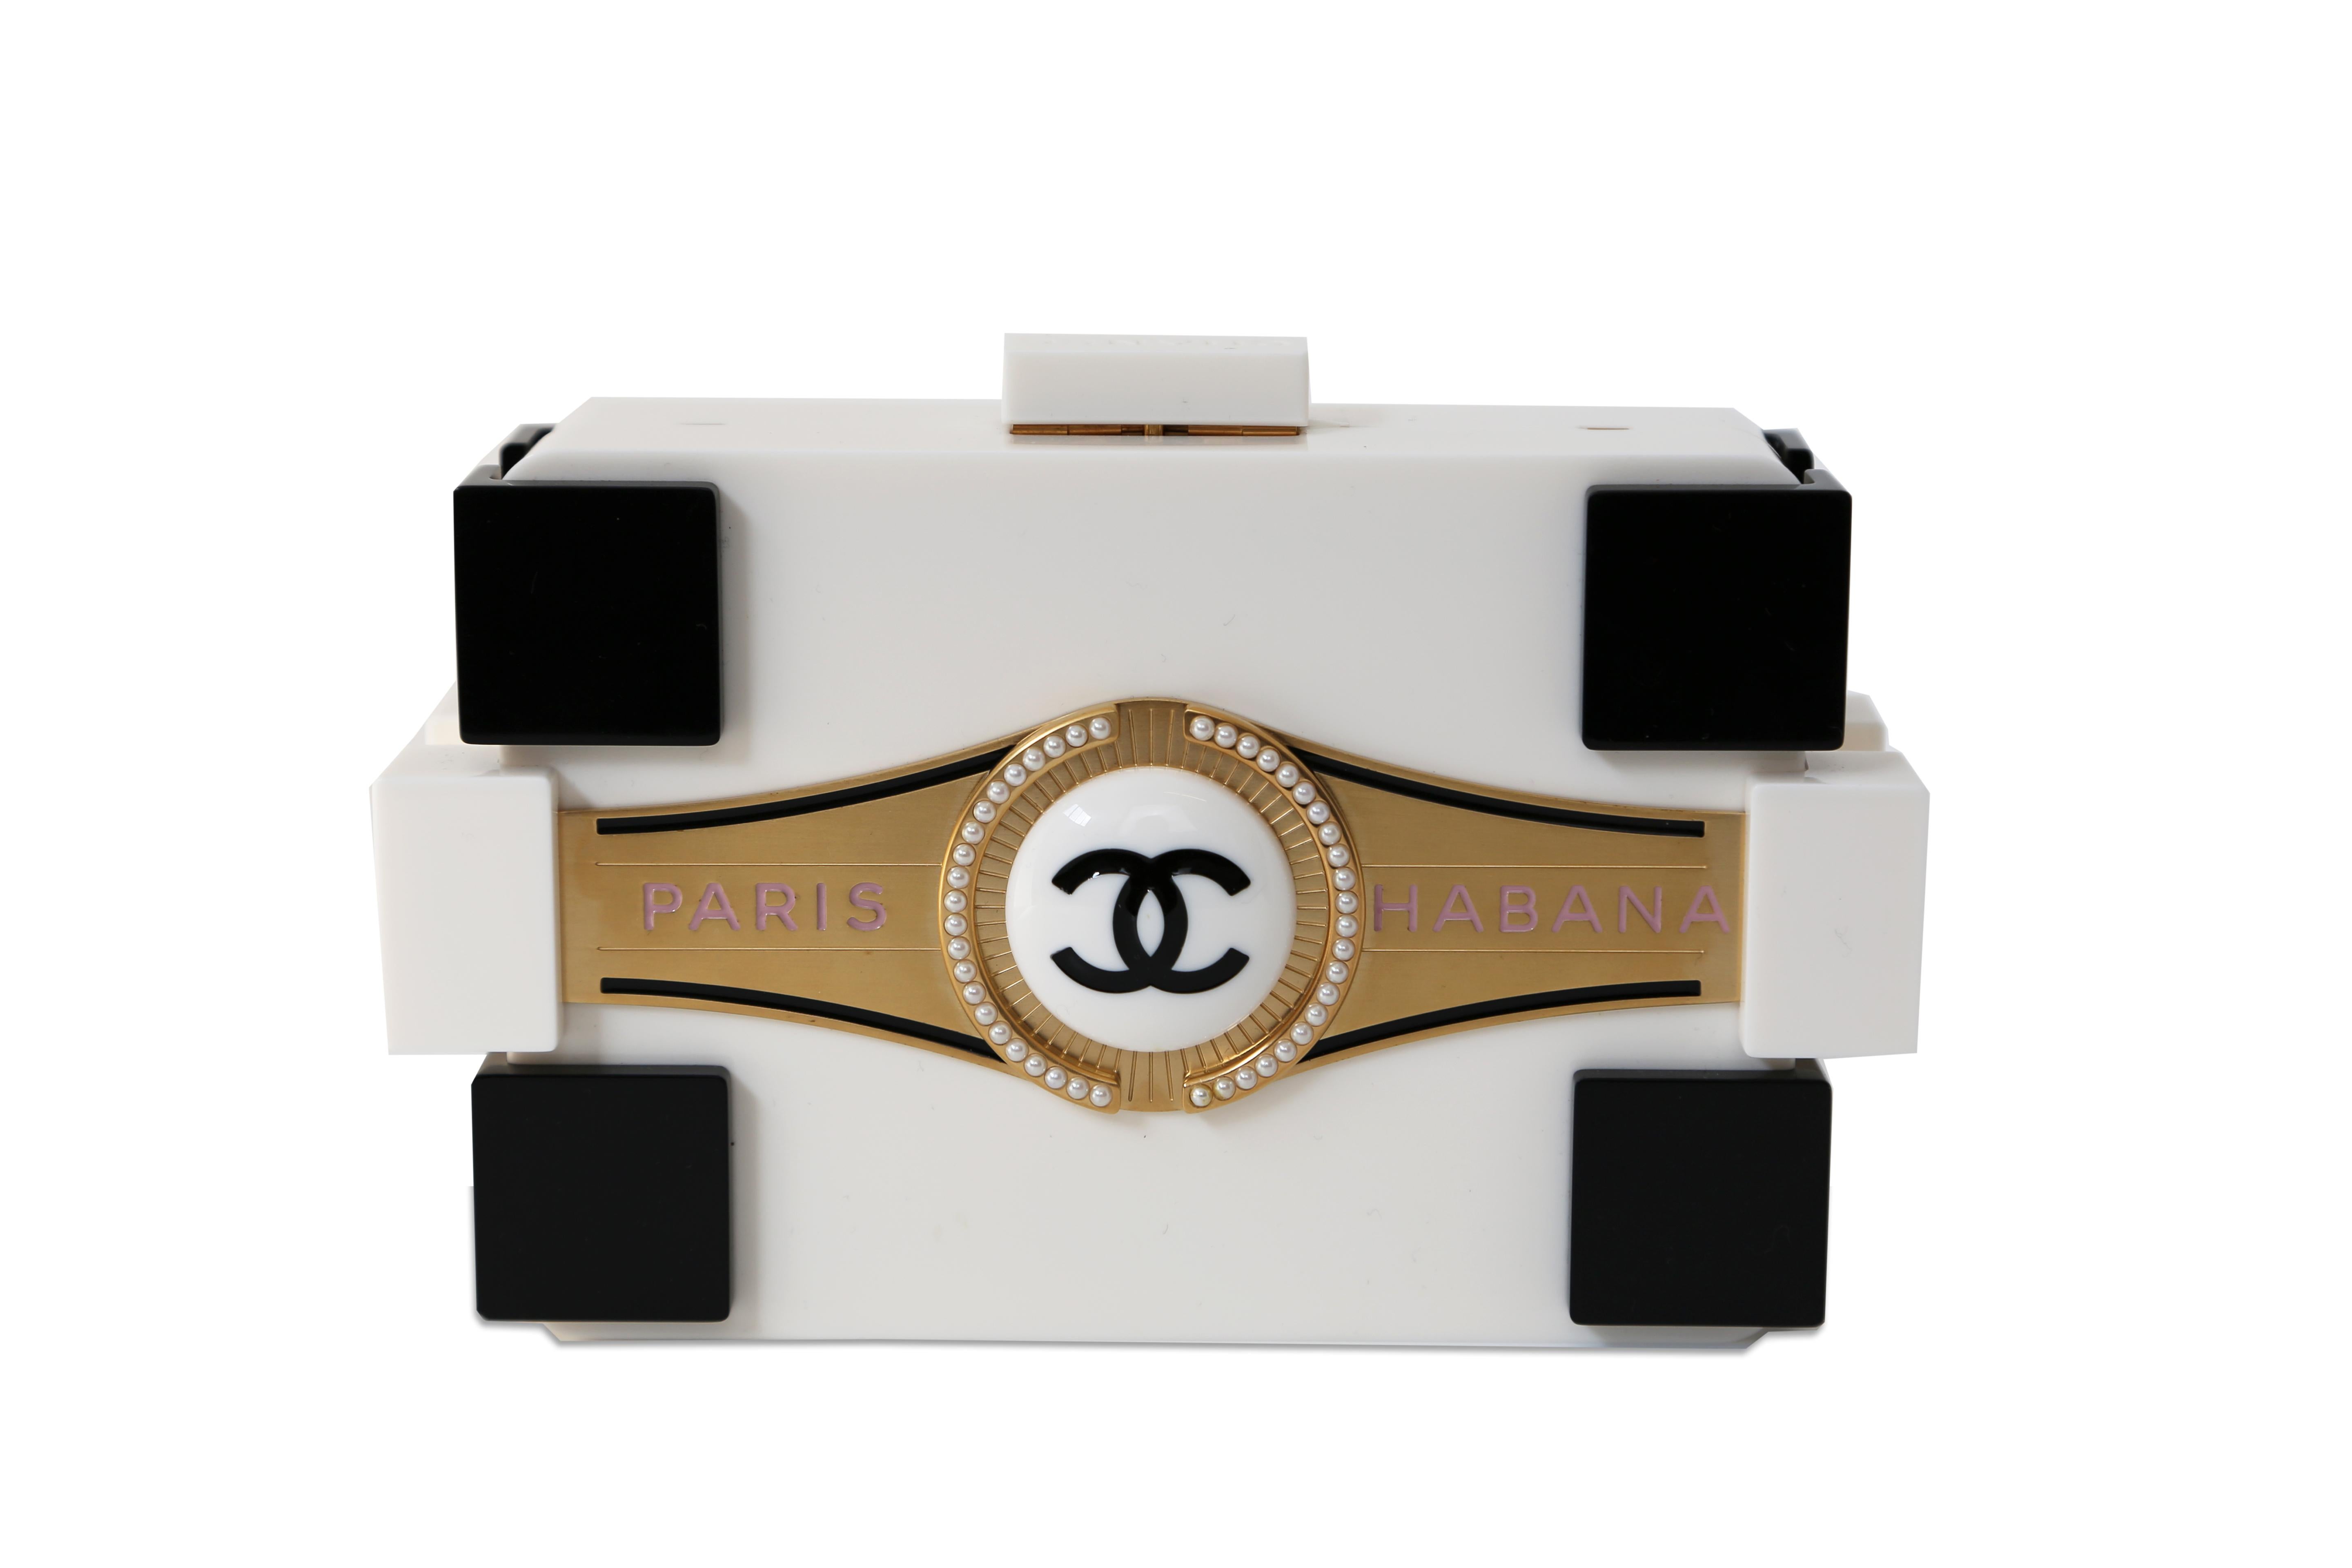 Karl Lagerfeld's lasting impact on fashion shines in this collector's edition clutch from his final runway show. Inspired by Cuba, this rare and hard-to-find bag features a cigar-box design, a lucite Lego Boy Brick shape, and elegant gold and pearl